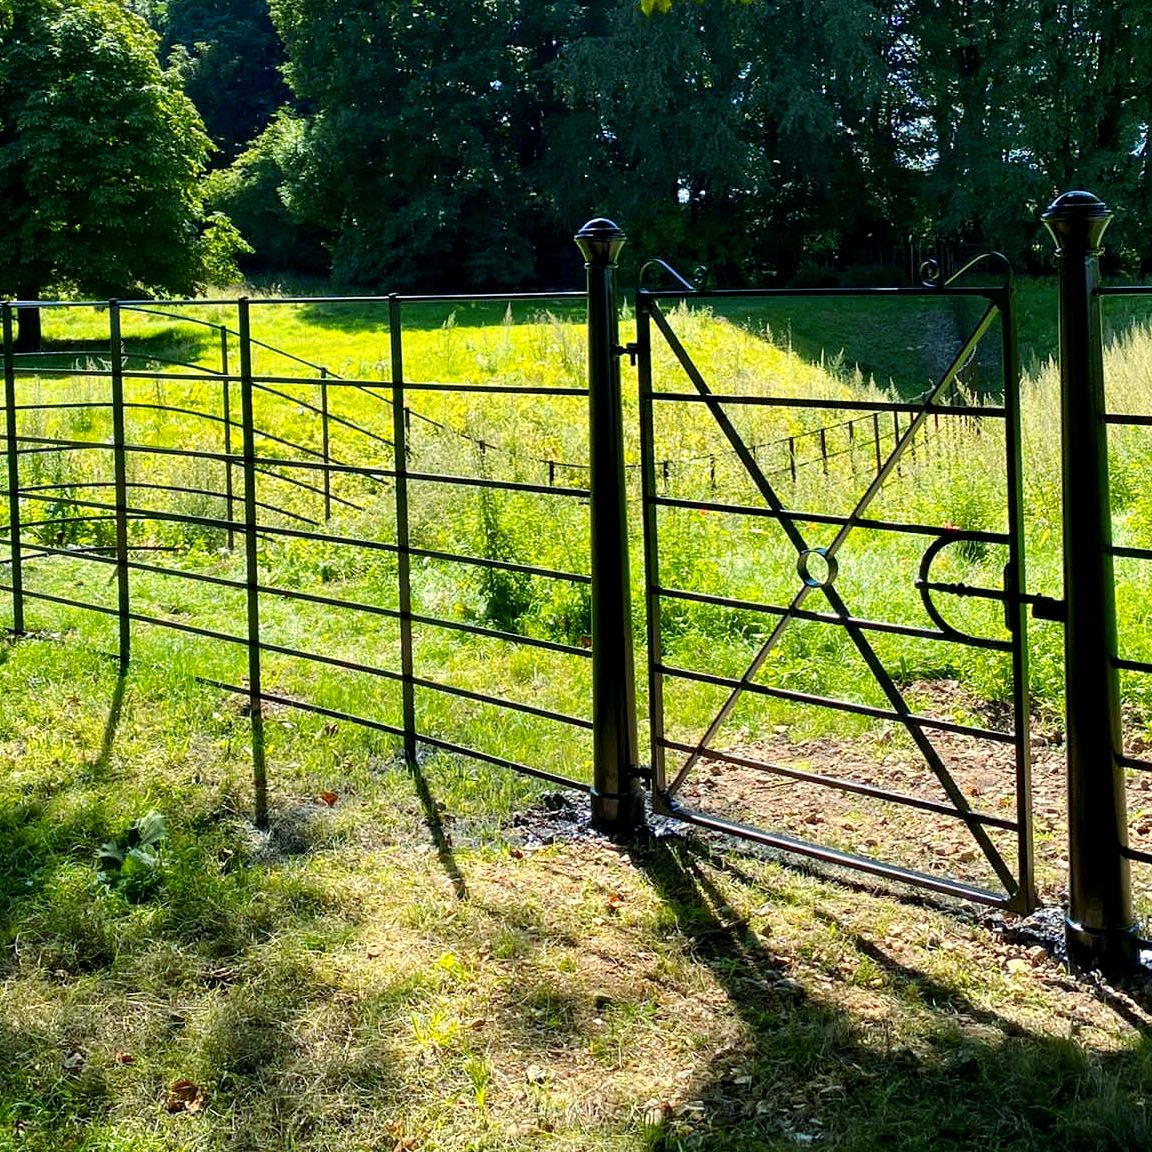 Deer gates mirror the exact design of the fence, with rails flowing in line with the fencing you have installed, providing a seamless look to your fence line. The gates can be manufactured as singles or as double gates

#deerfence
#deer
#gates
#steel
#solidsteel
#thetraditionalco